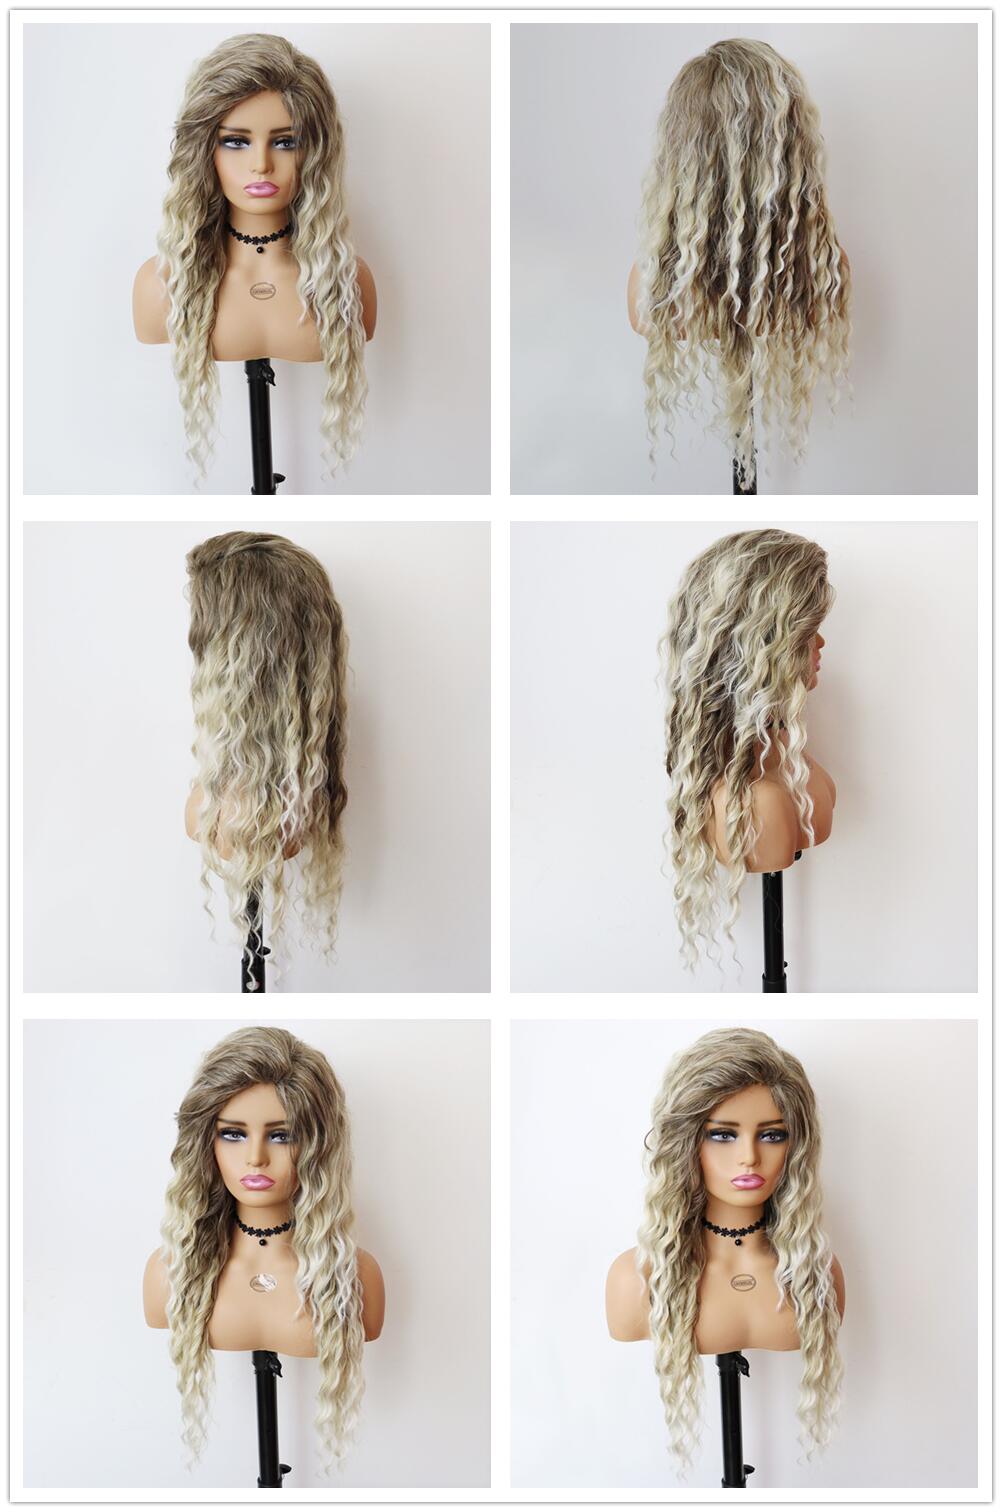 Waving Hair Long Curly Synthetic Wig